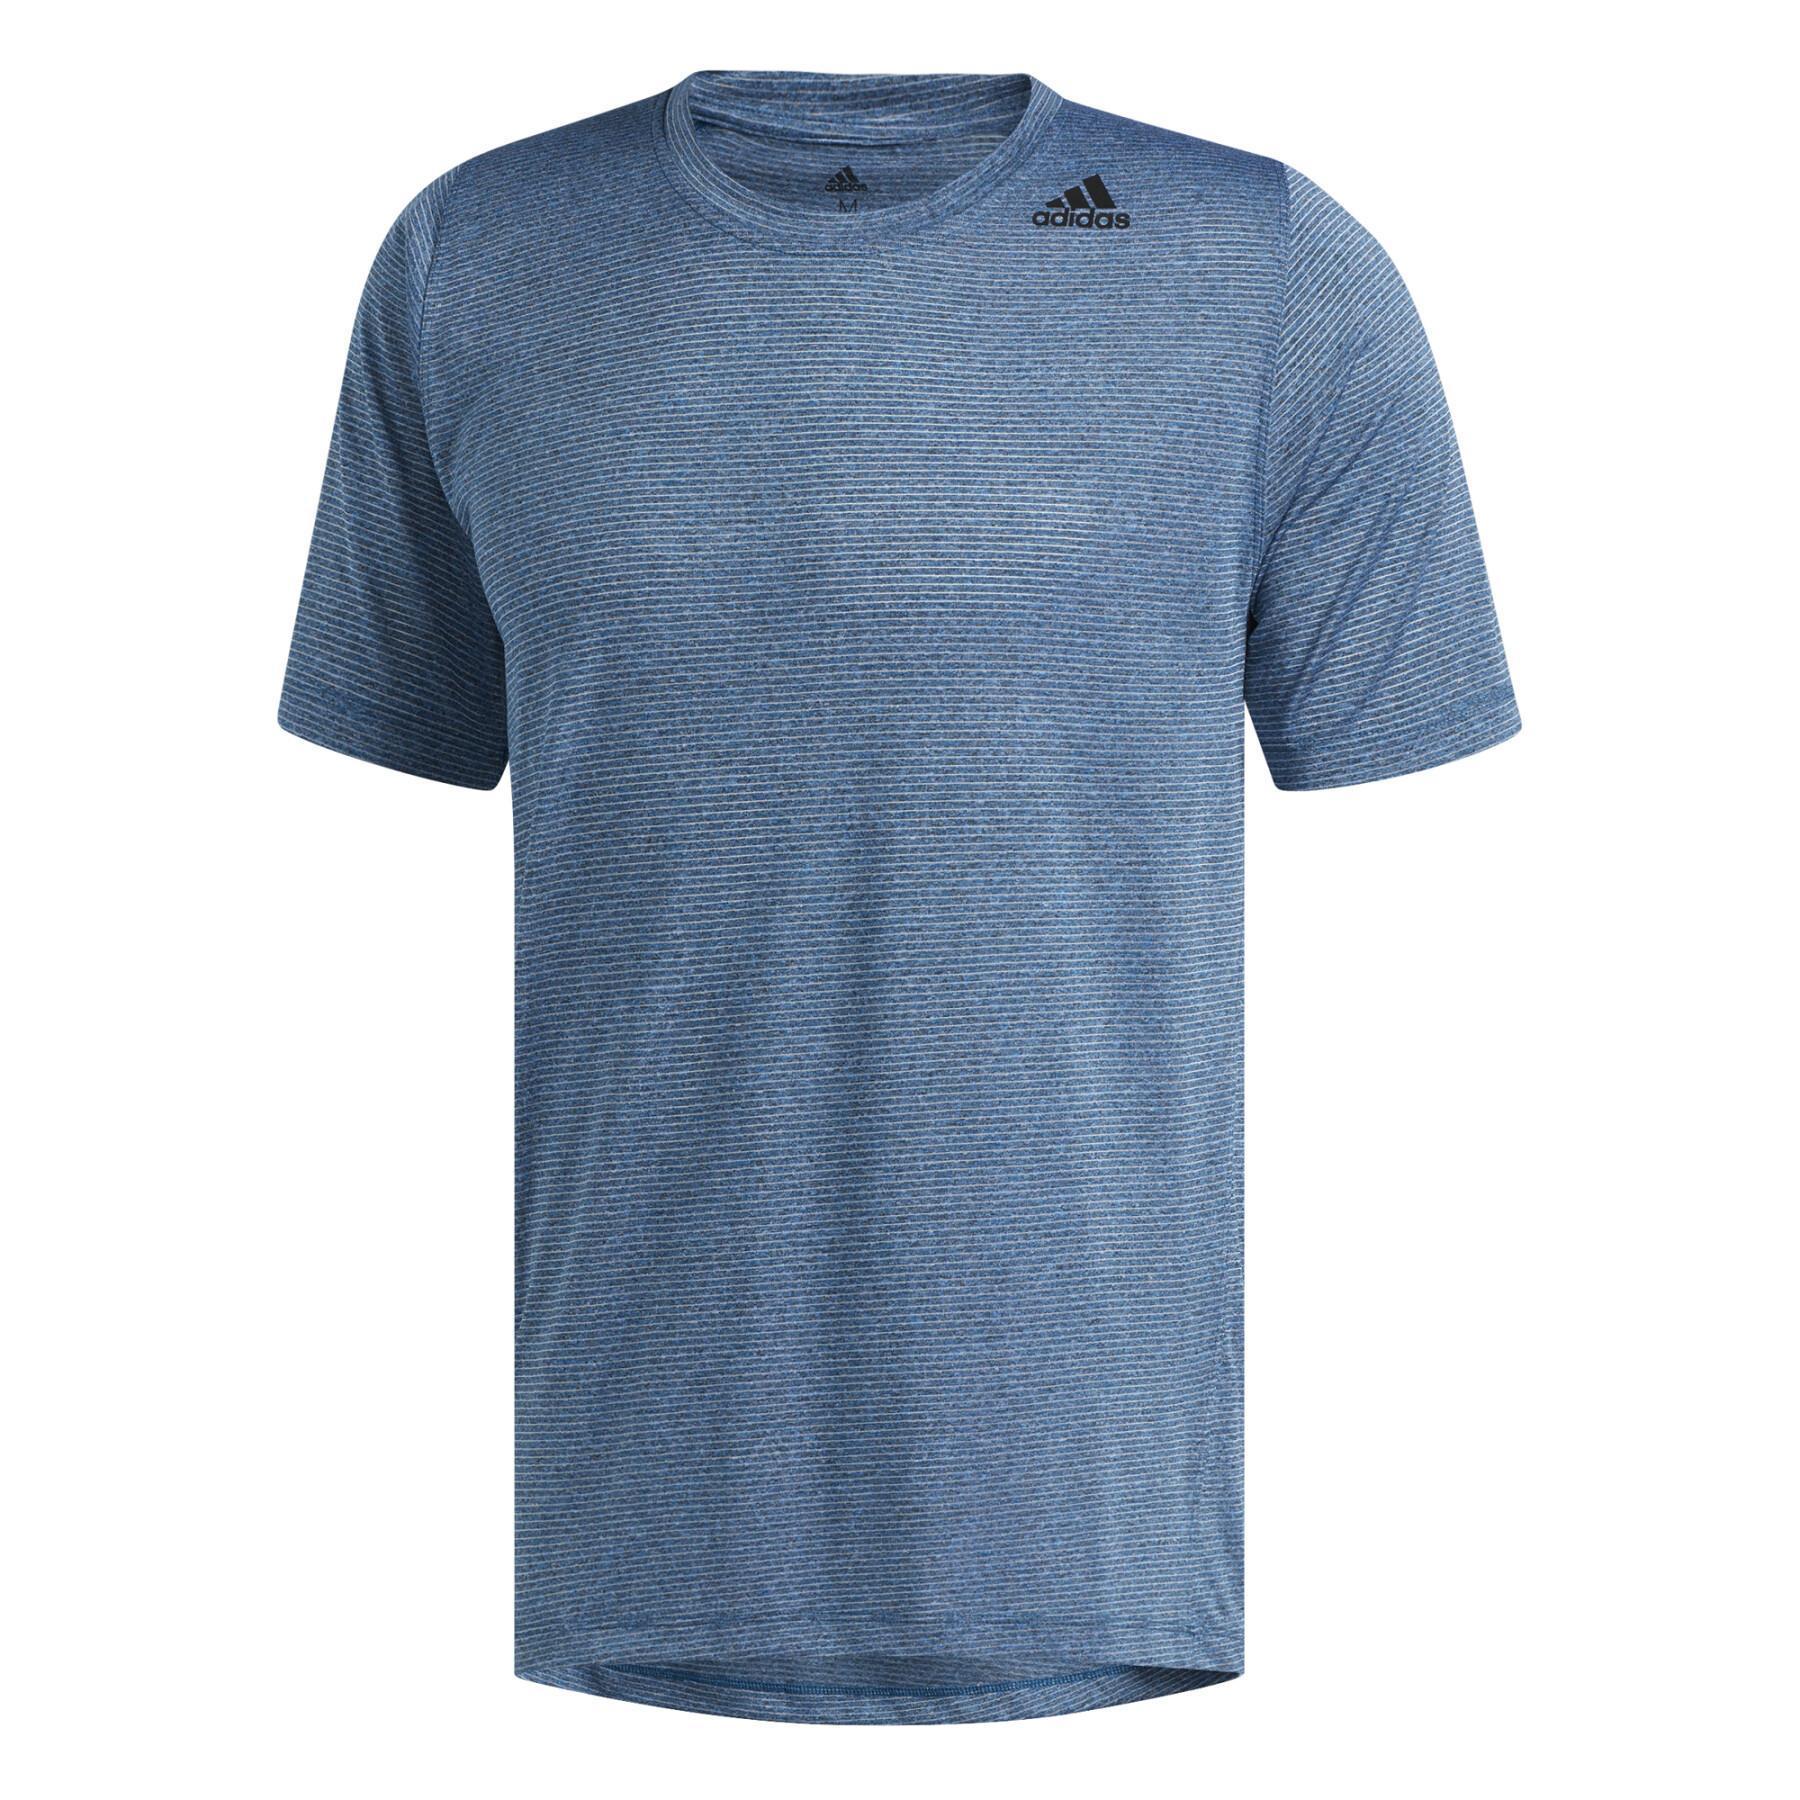 Camiseta adidas FreeLift Tech Climacool Fitted